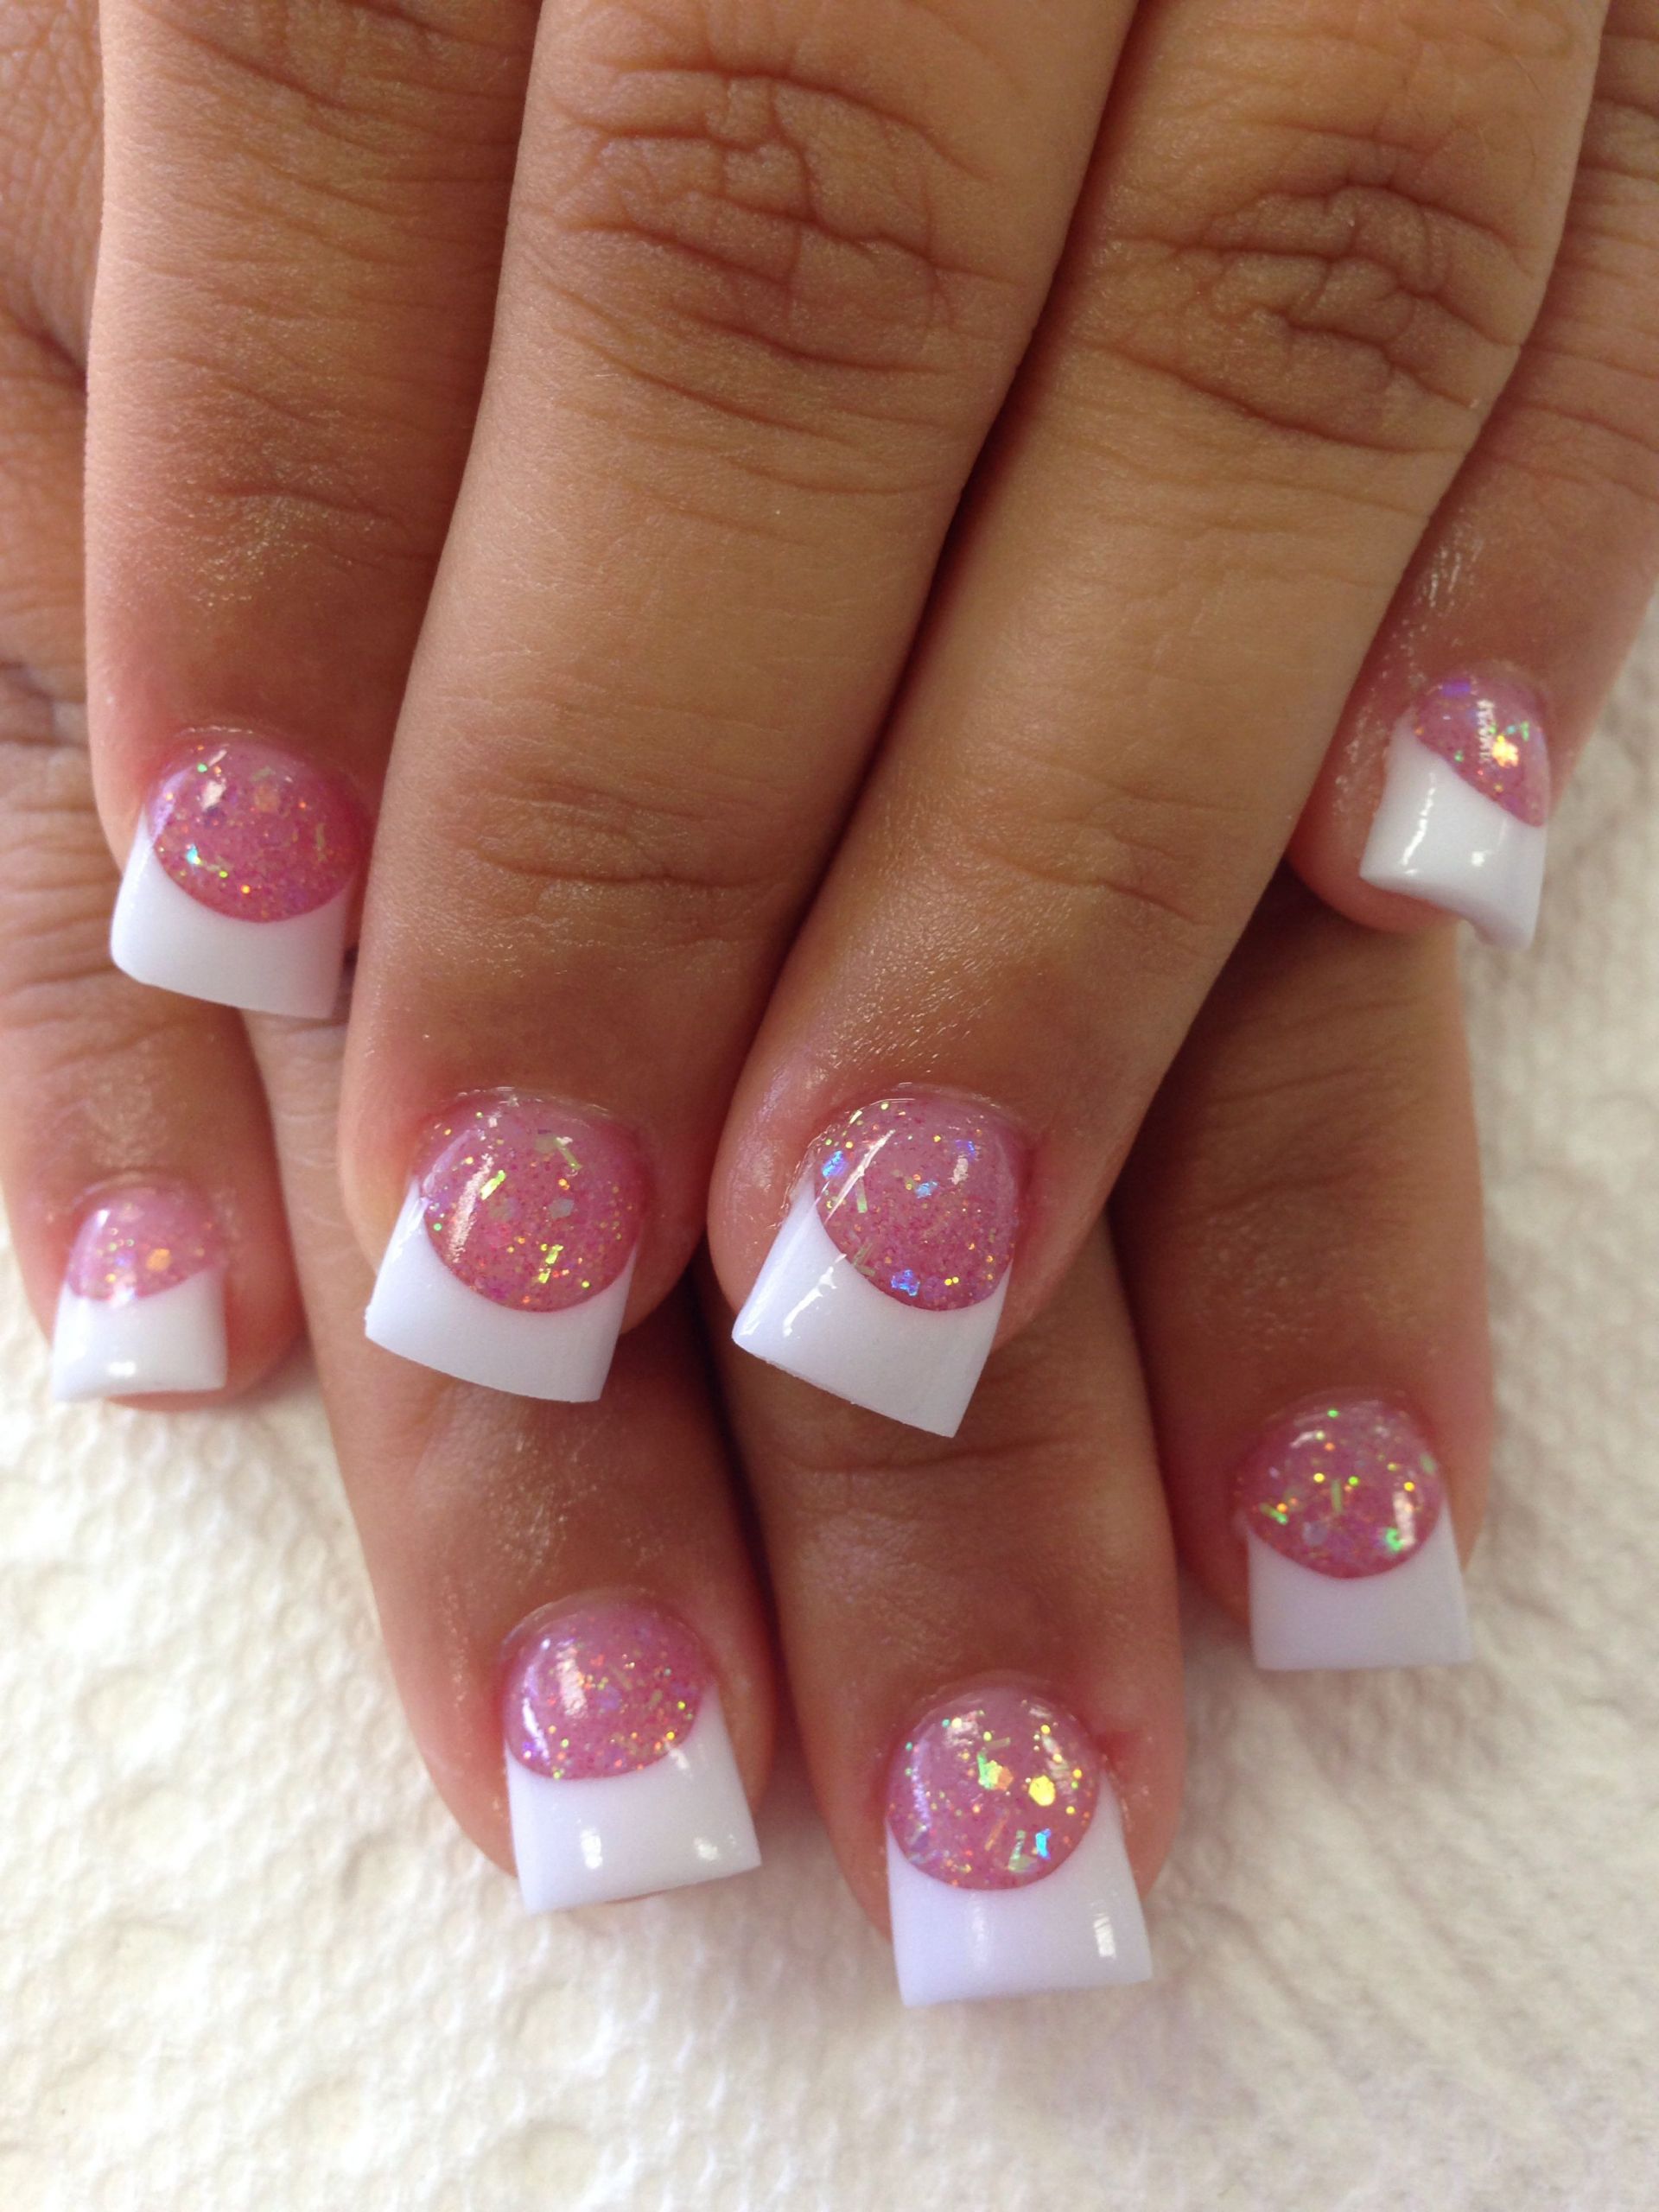 Pink And White Glitter Acrylic Nails
 Love the pink glitter with white tips